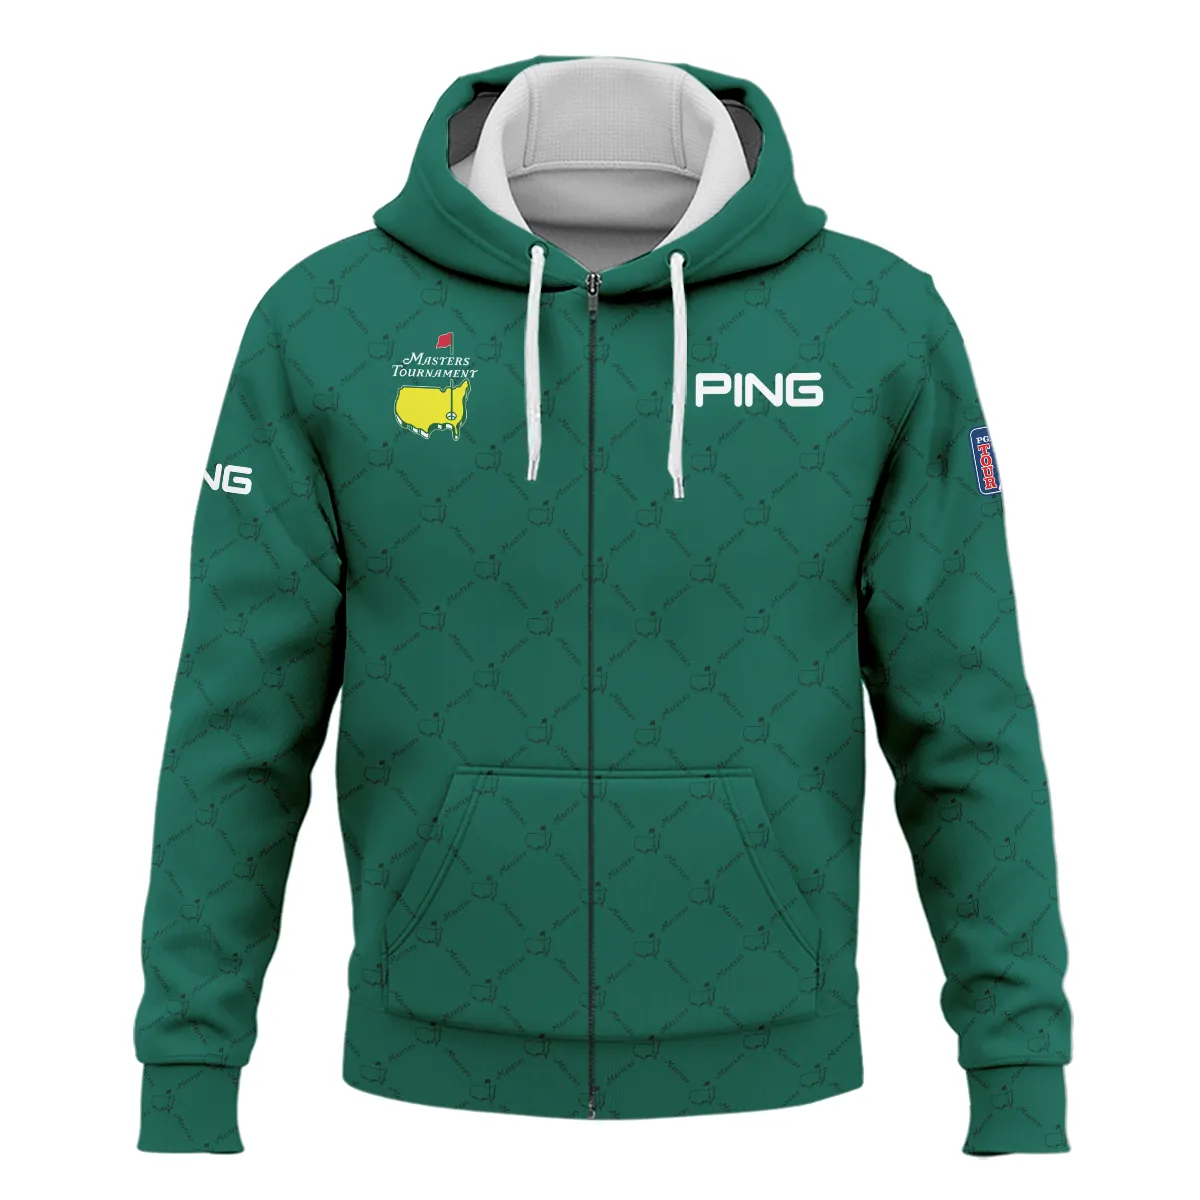 Golf Sport Pattern Color Green Mix Black Masters Tournament Ping Zipper Hoodie Shirt Style Classic